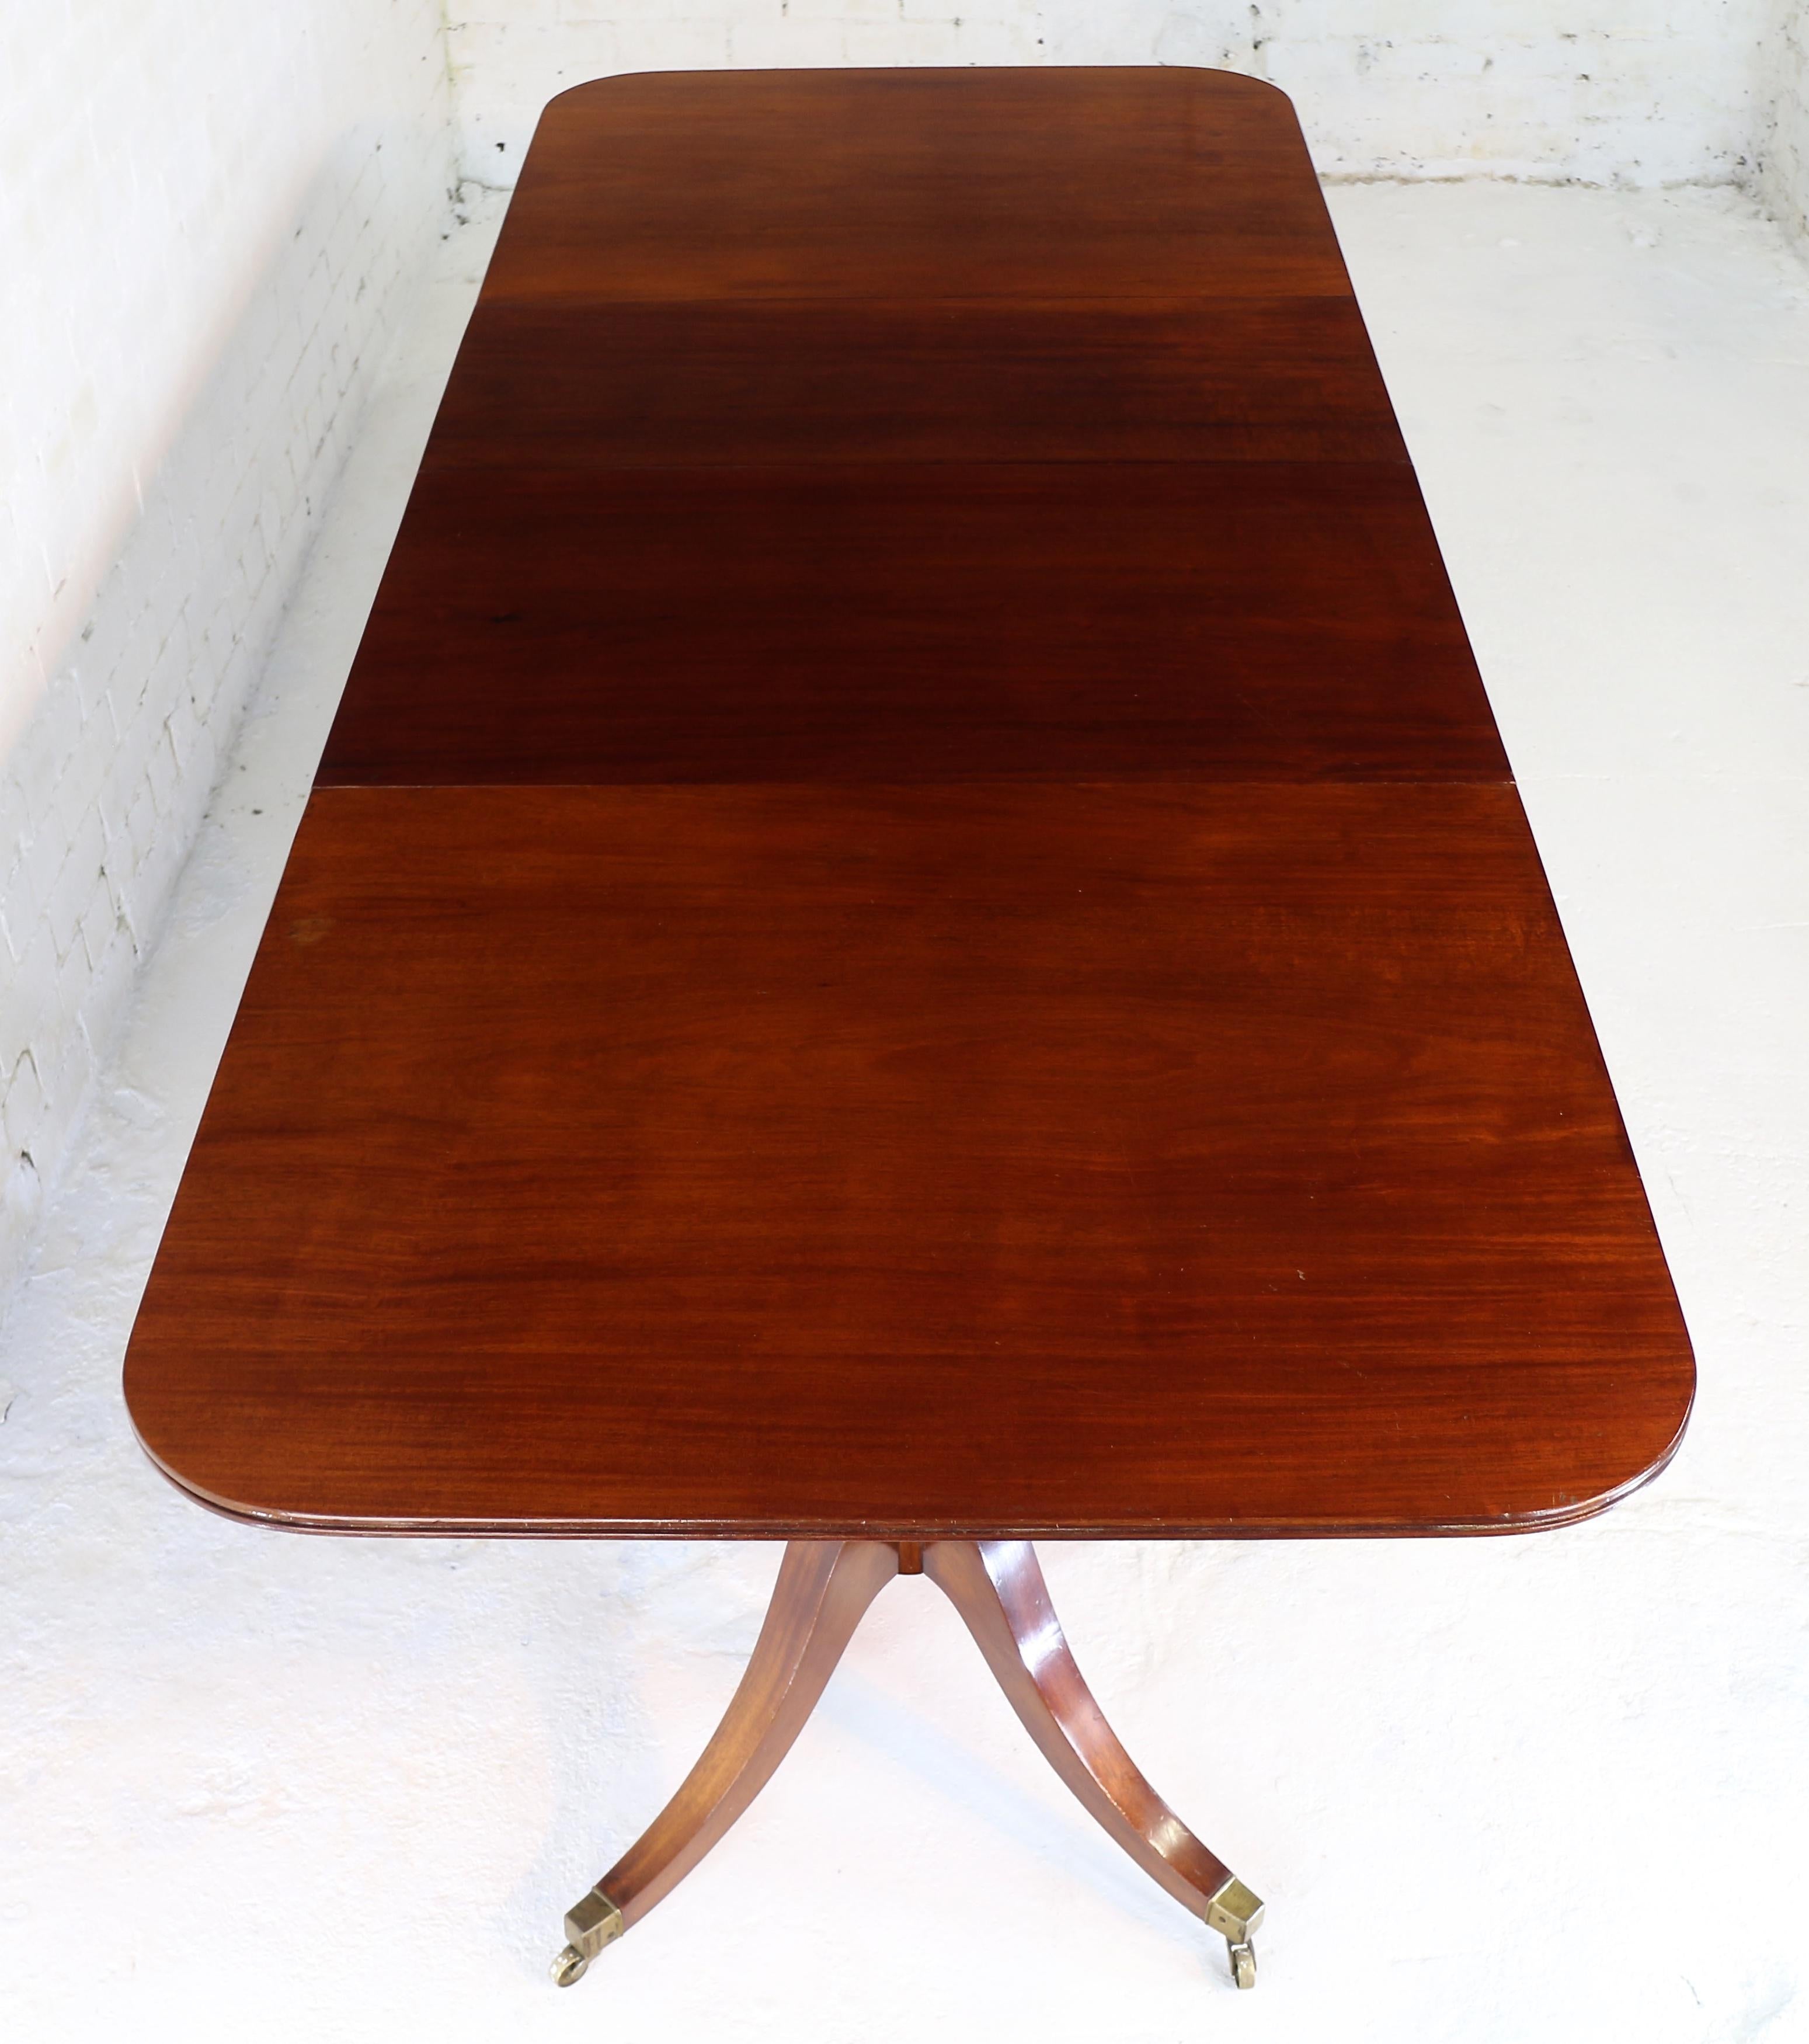 British Antique English Regency & Later Solid Mahogany Extending Two Pillar Dining Table